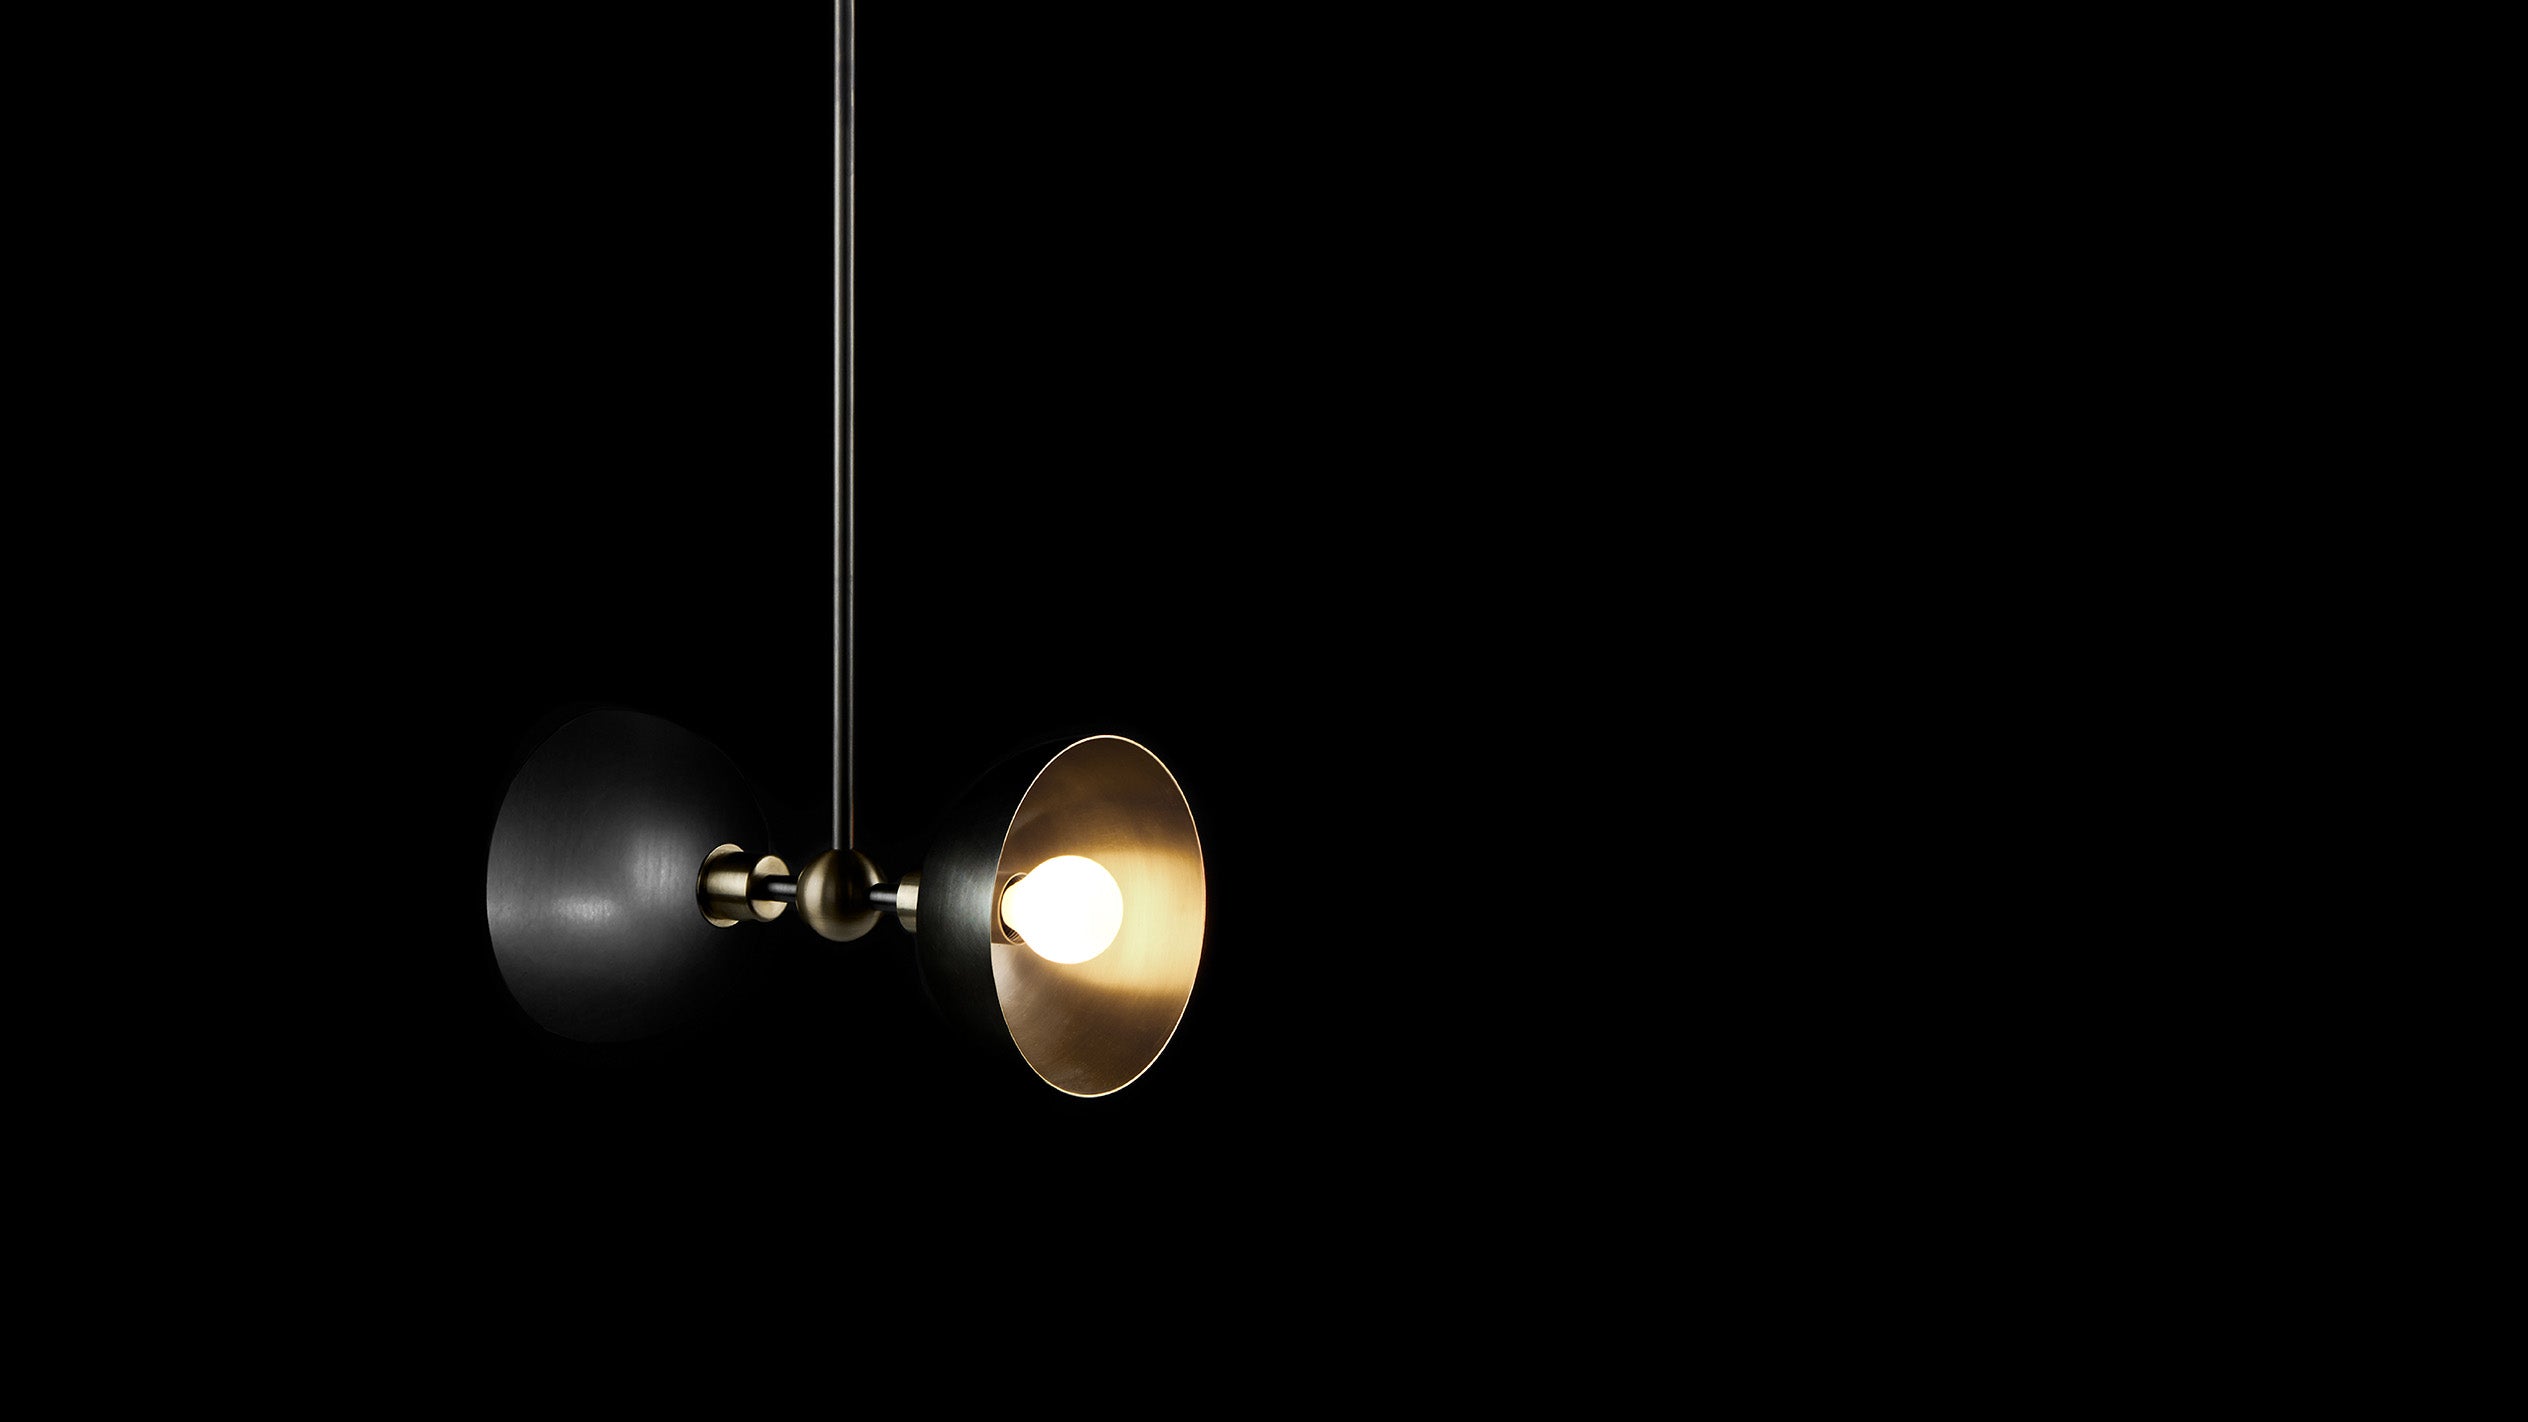 TRAPEZE : 2 ceiling pendant in Blackened Brass finish with Aged Brass bowls, hanging against a black background. 